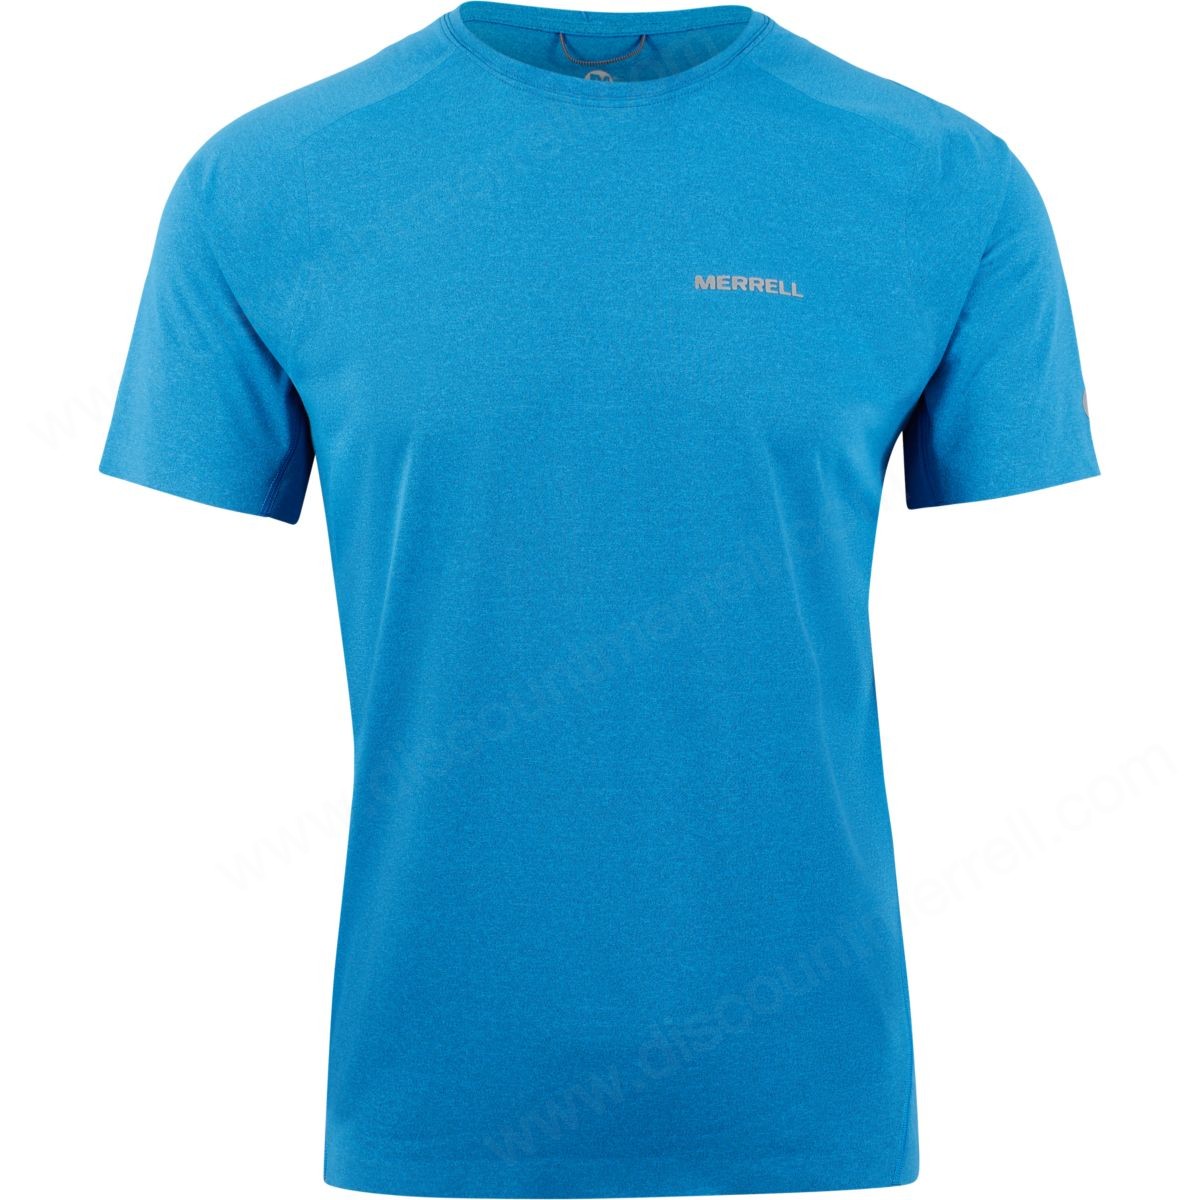 Merrell Man's Short Sleeve Tech Tshirts With Polartec® Power Stretch® Pro™ Fabric French Blue - Merrell Man's Short Sleeve Tech Tshirts With Polartec® Power Stretch® Pro™ Fabric French Blue